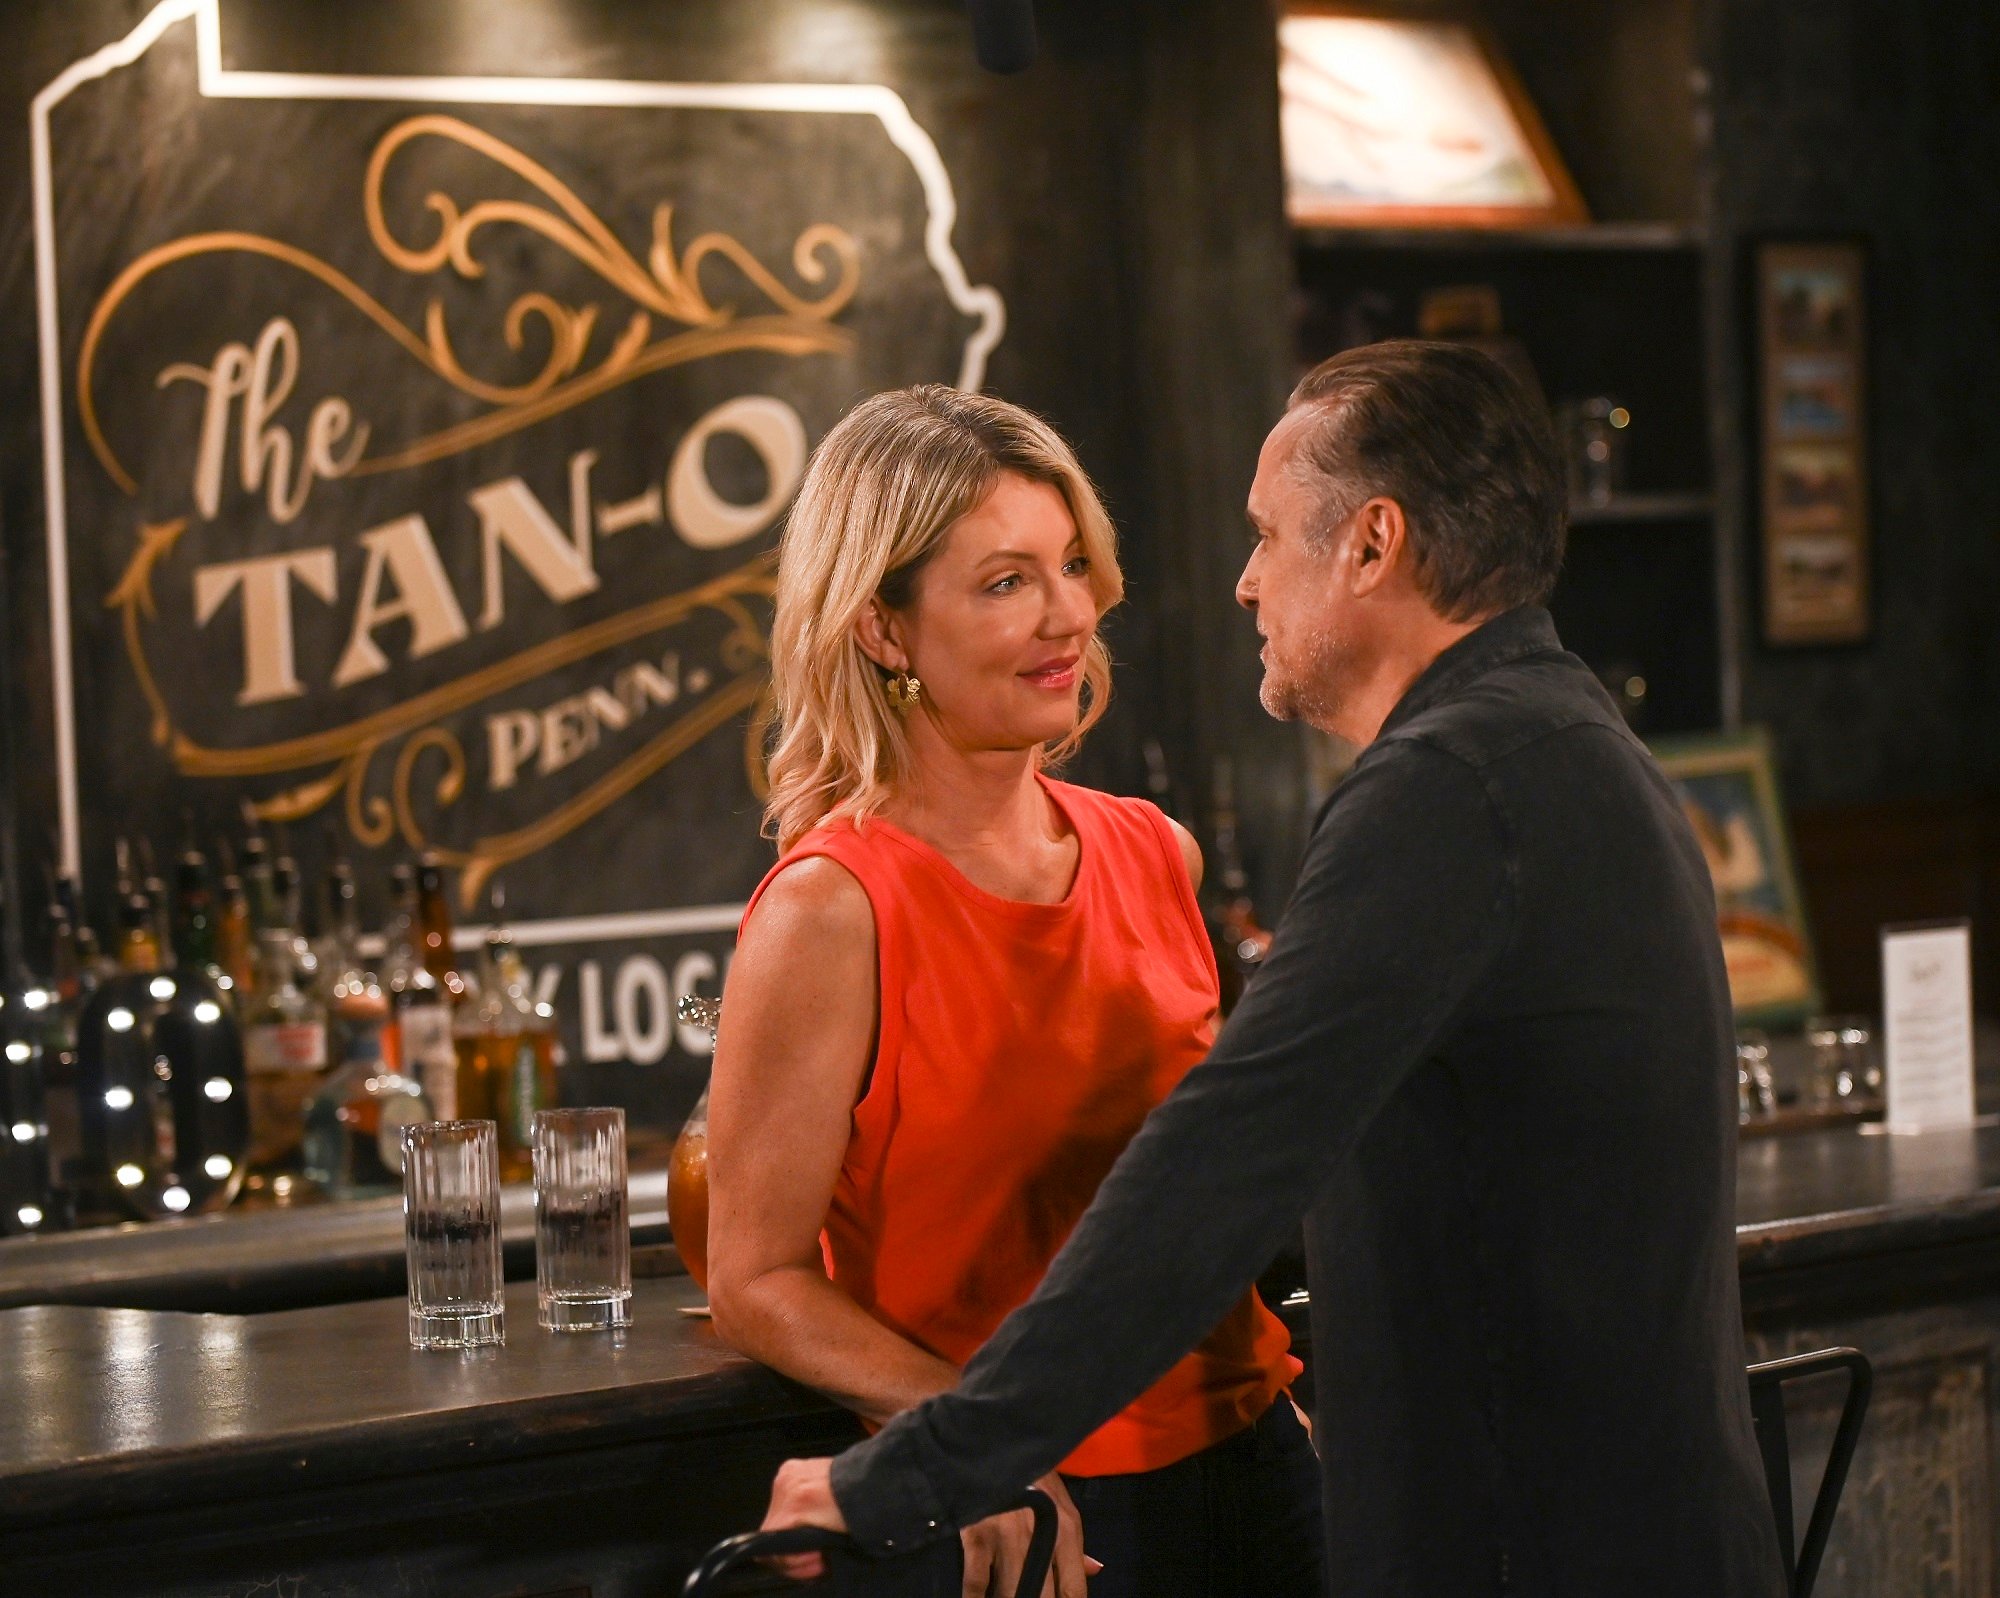 General Hospital speculation focuses on Nina, pictured here leaning against a bar in a red short-sleeved shirt